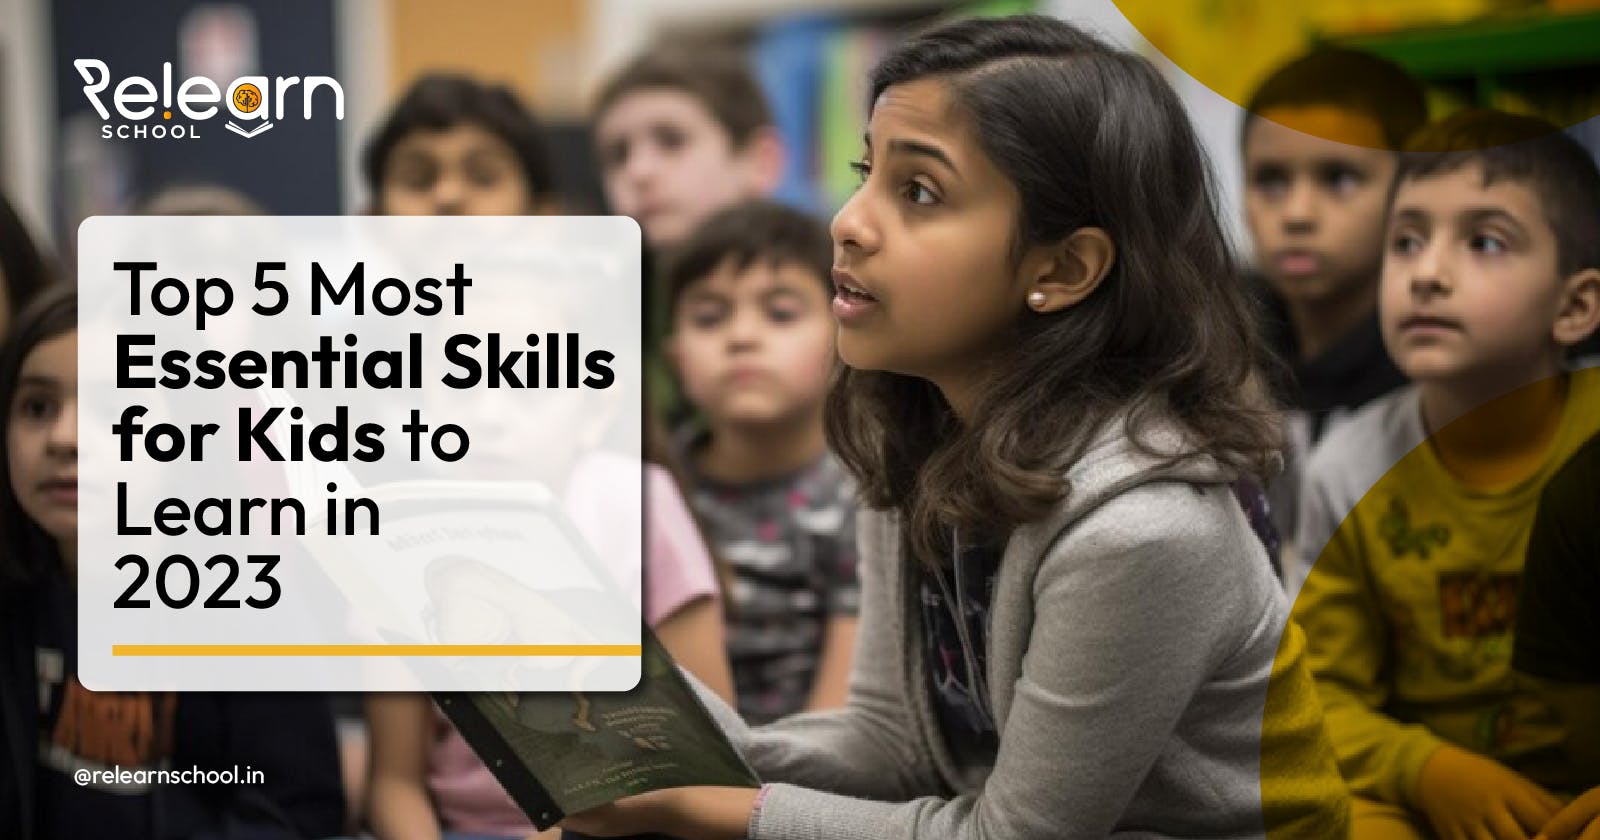 Top 5 Most Essential Skills for Kids to Learn in 2023